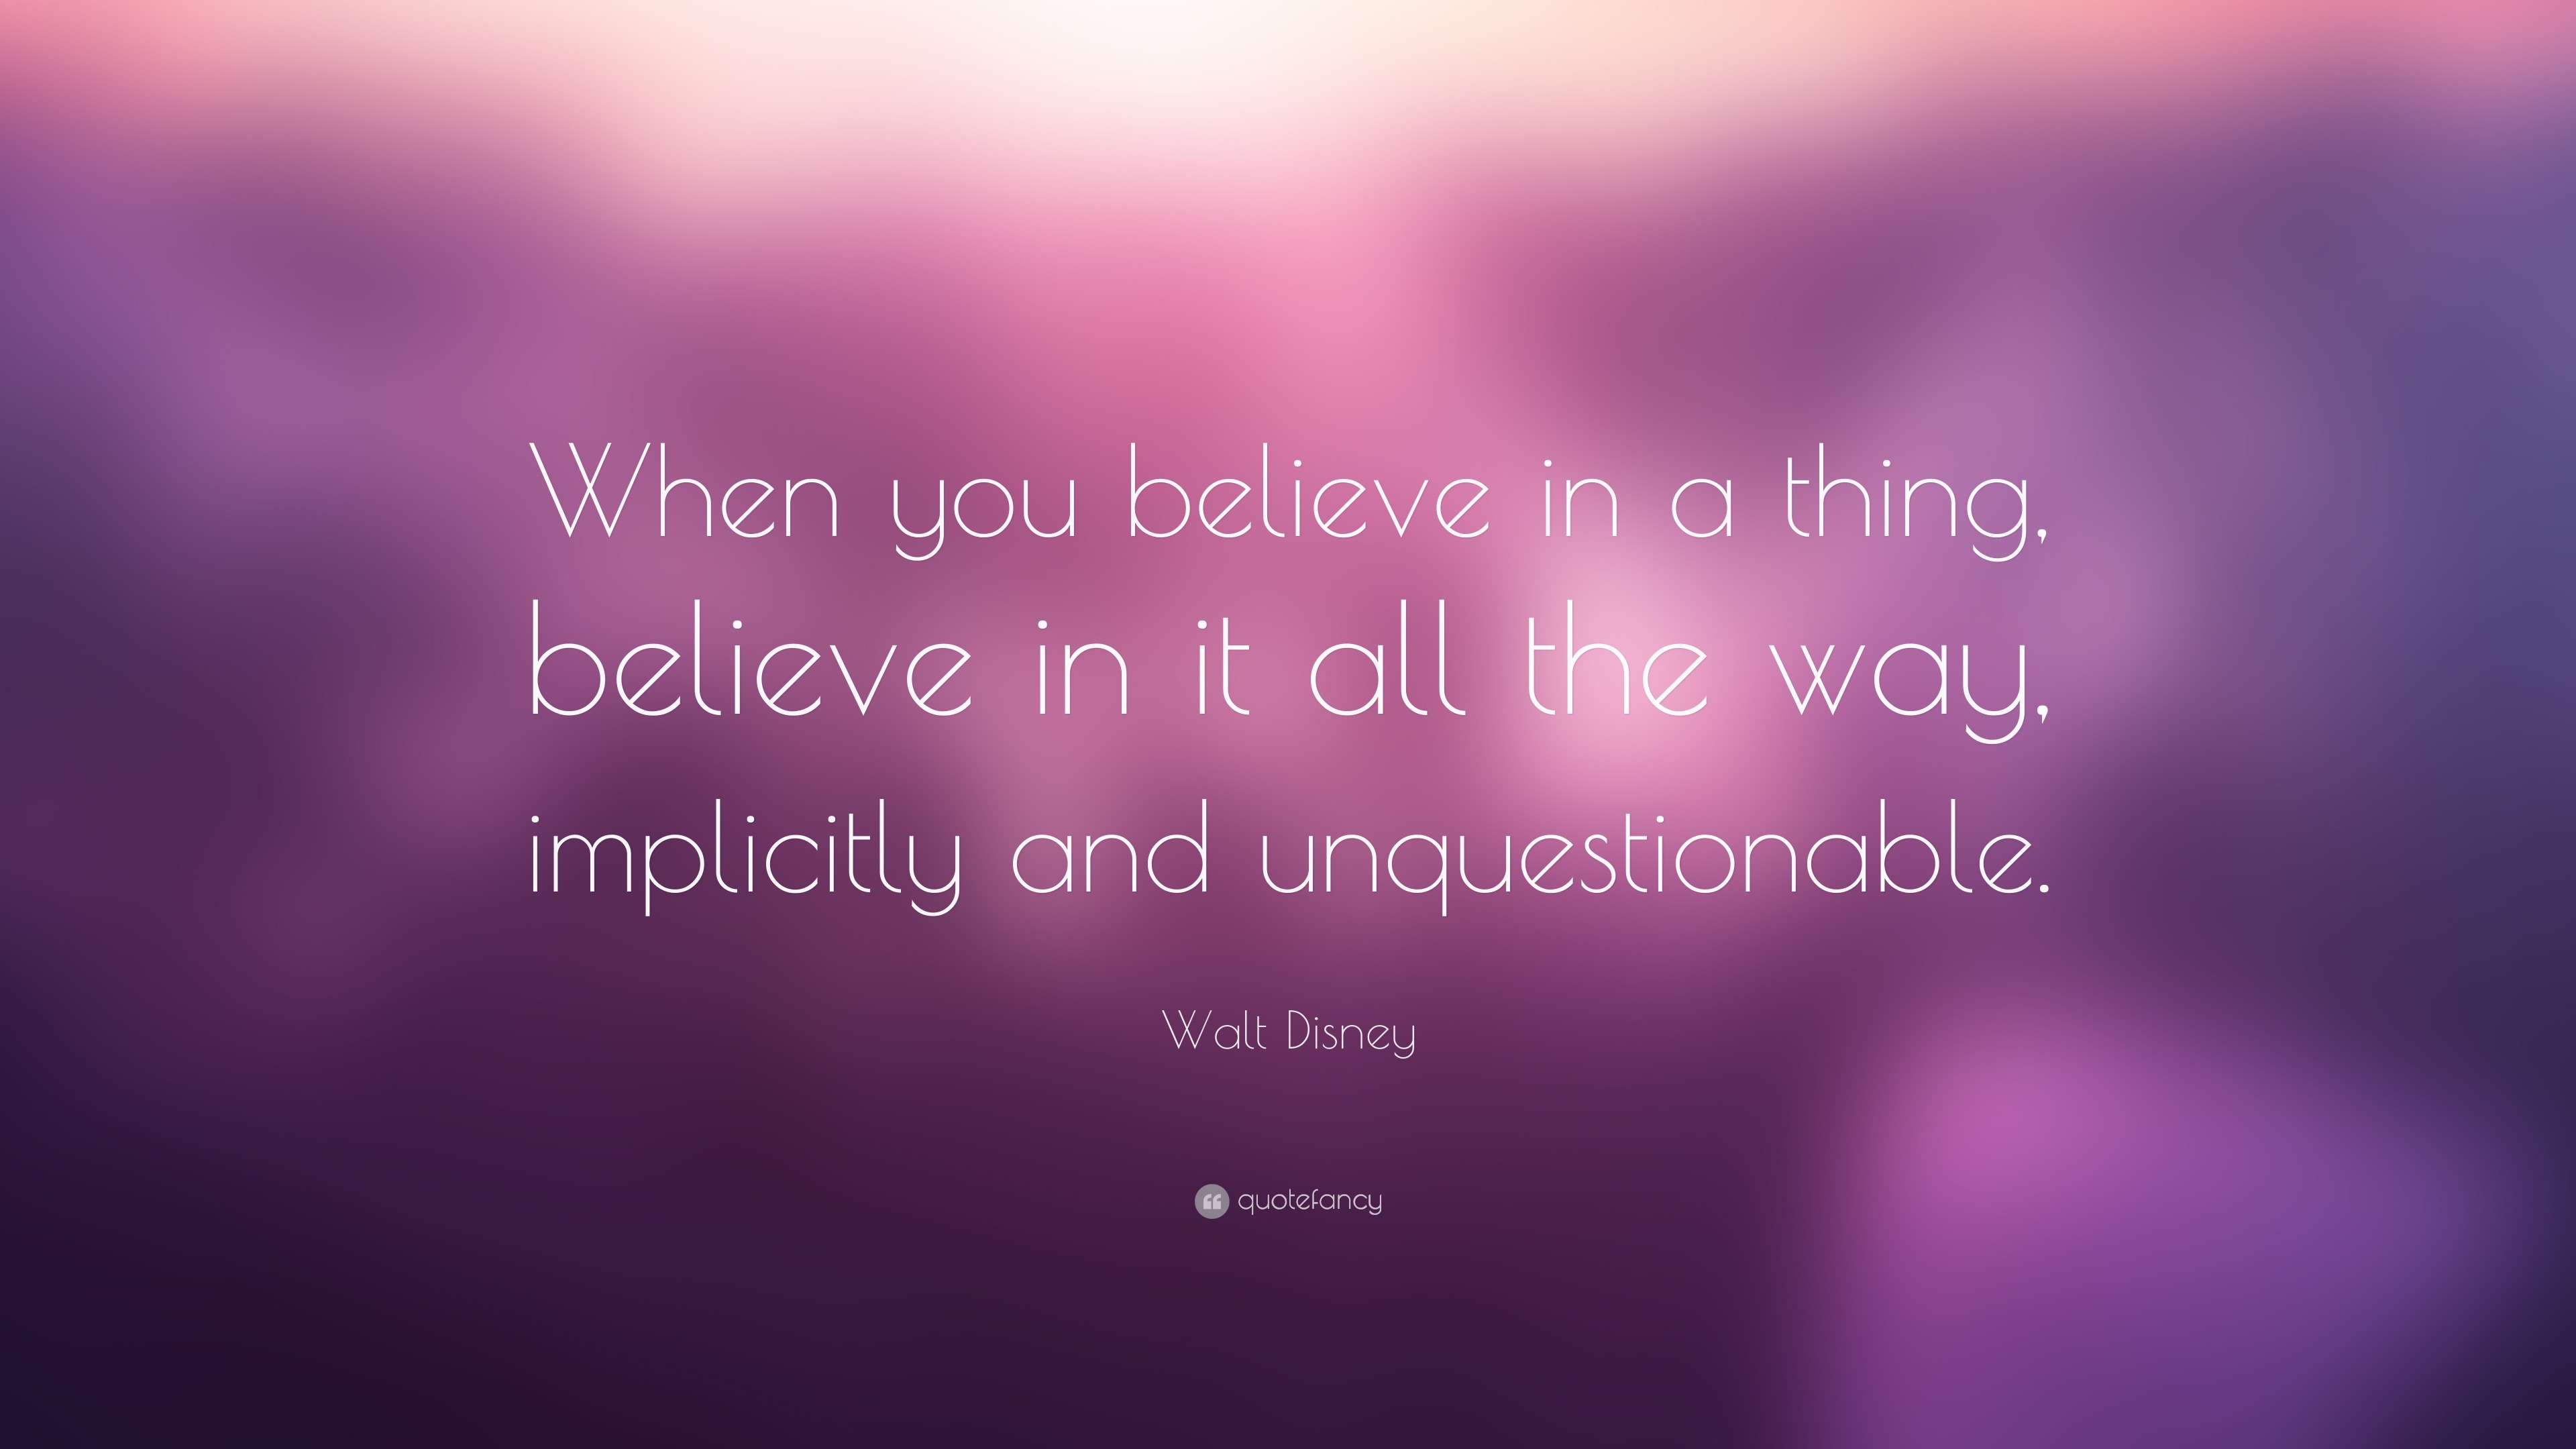 Walt Disney Quote When You Believe In A Thing Believe In It All The Way Implicitly And Unquestionable 23 Wallpapers Quotefancy